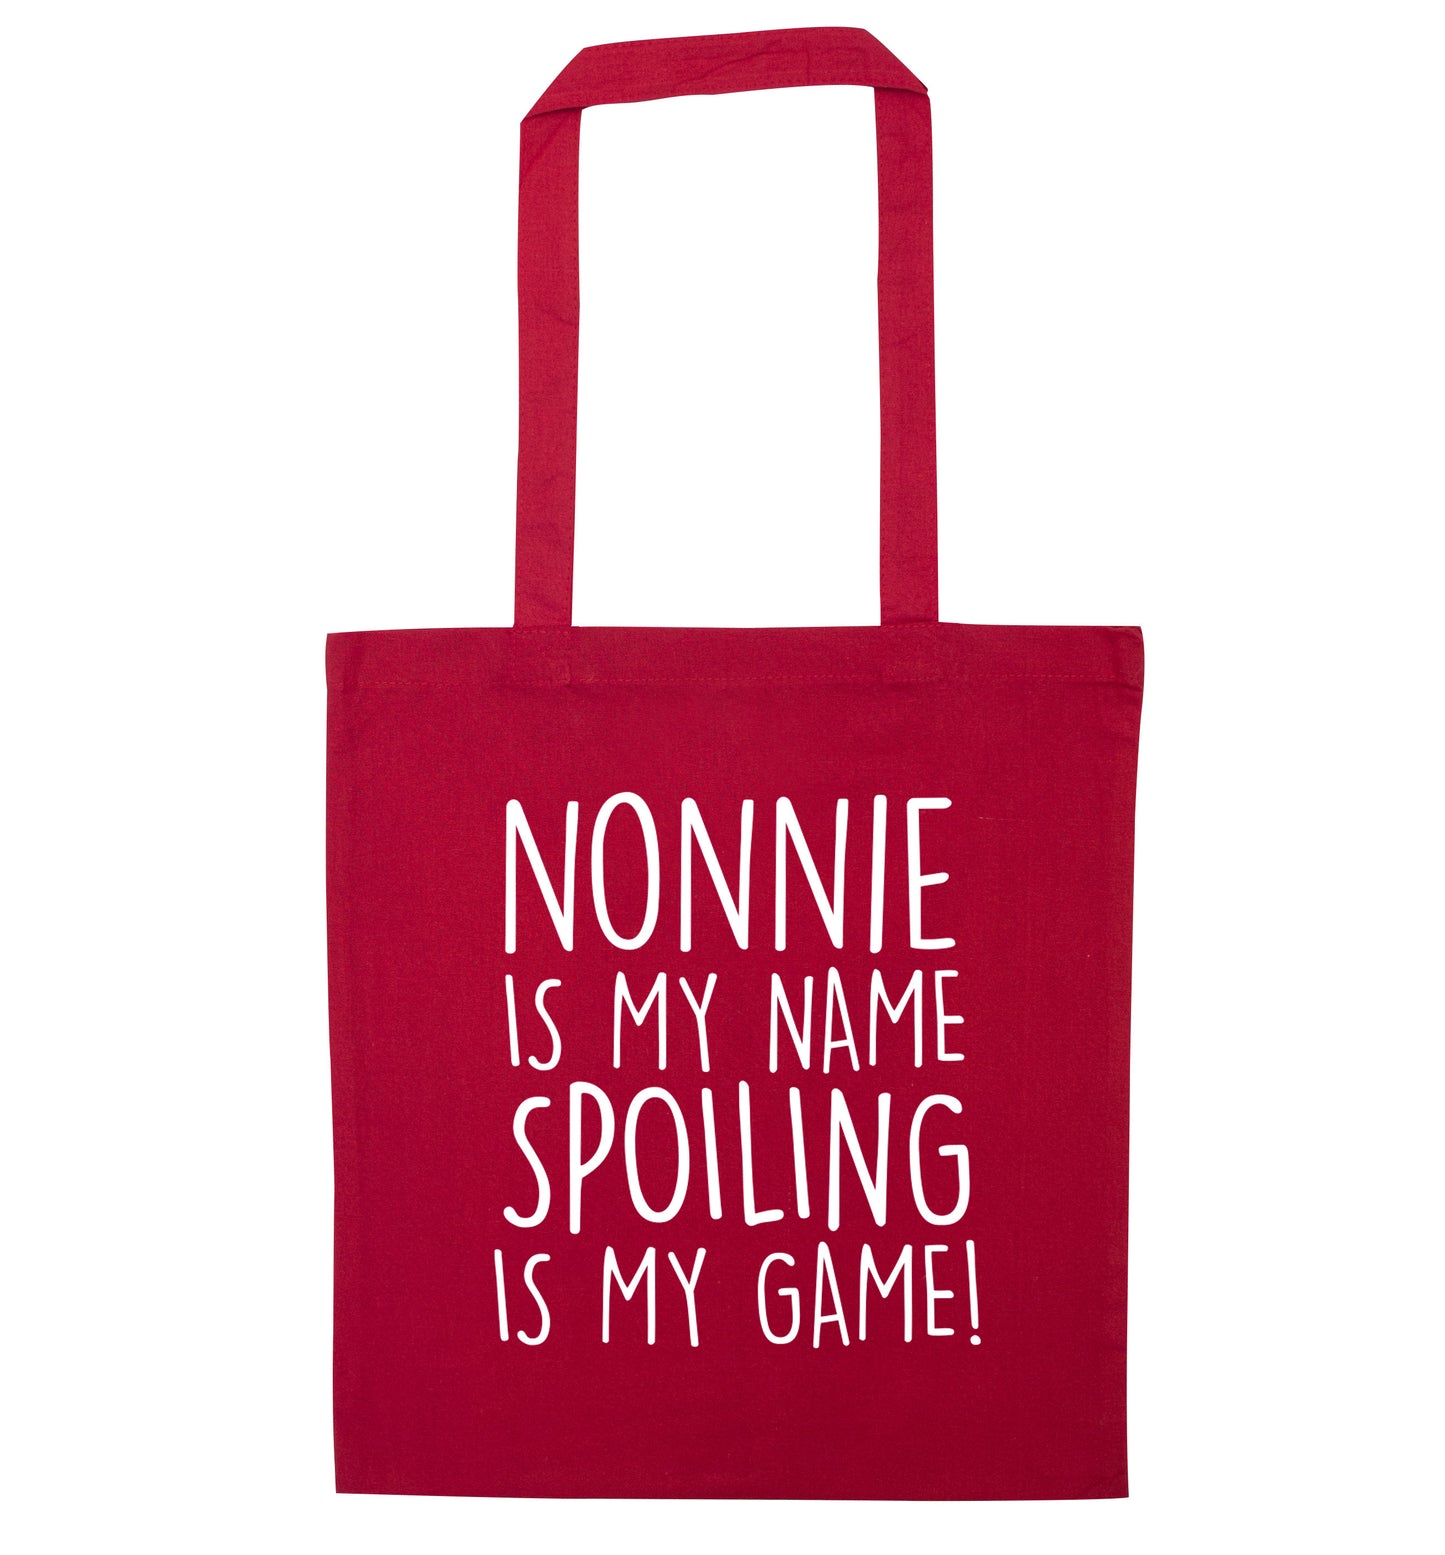 Nonnie is my name, spoiling is my game red tote bag